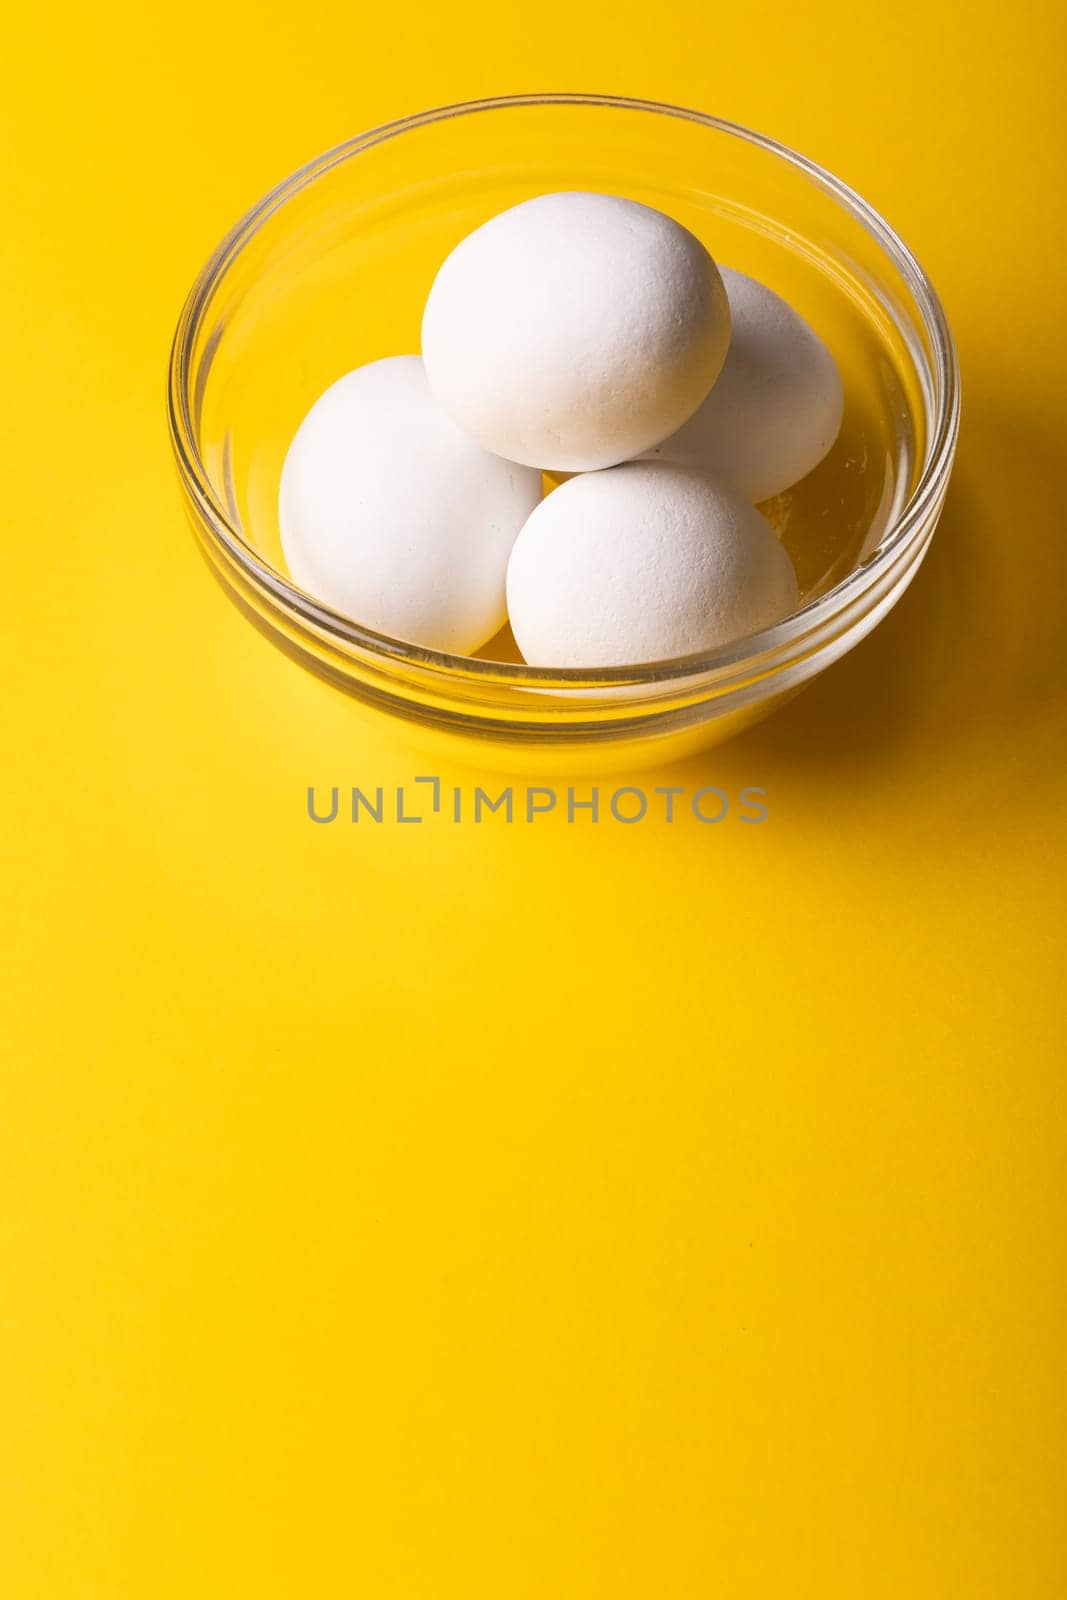 High angle view of fresh white eggs in glass bowl over yellow background with copy space. unaltered, food, healthy eating concept.